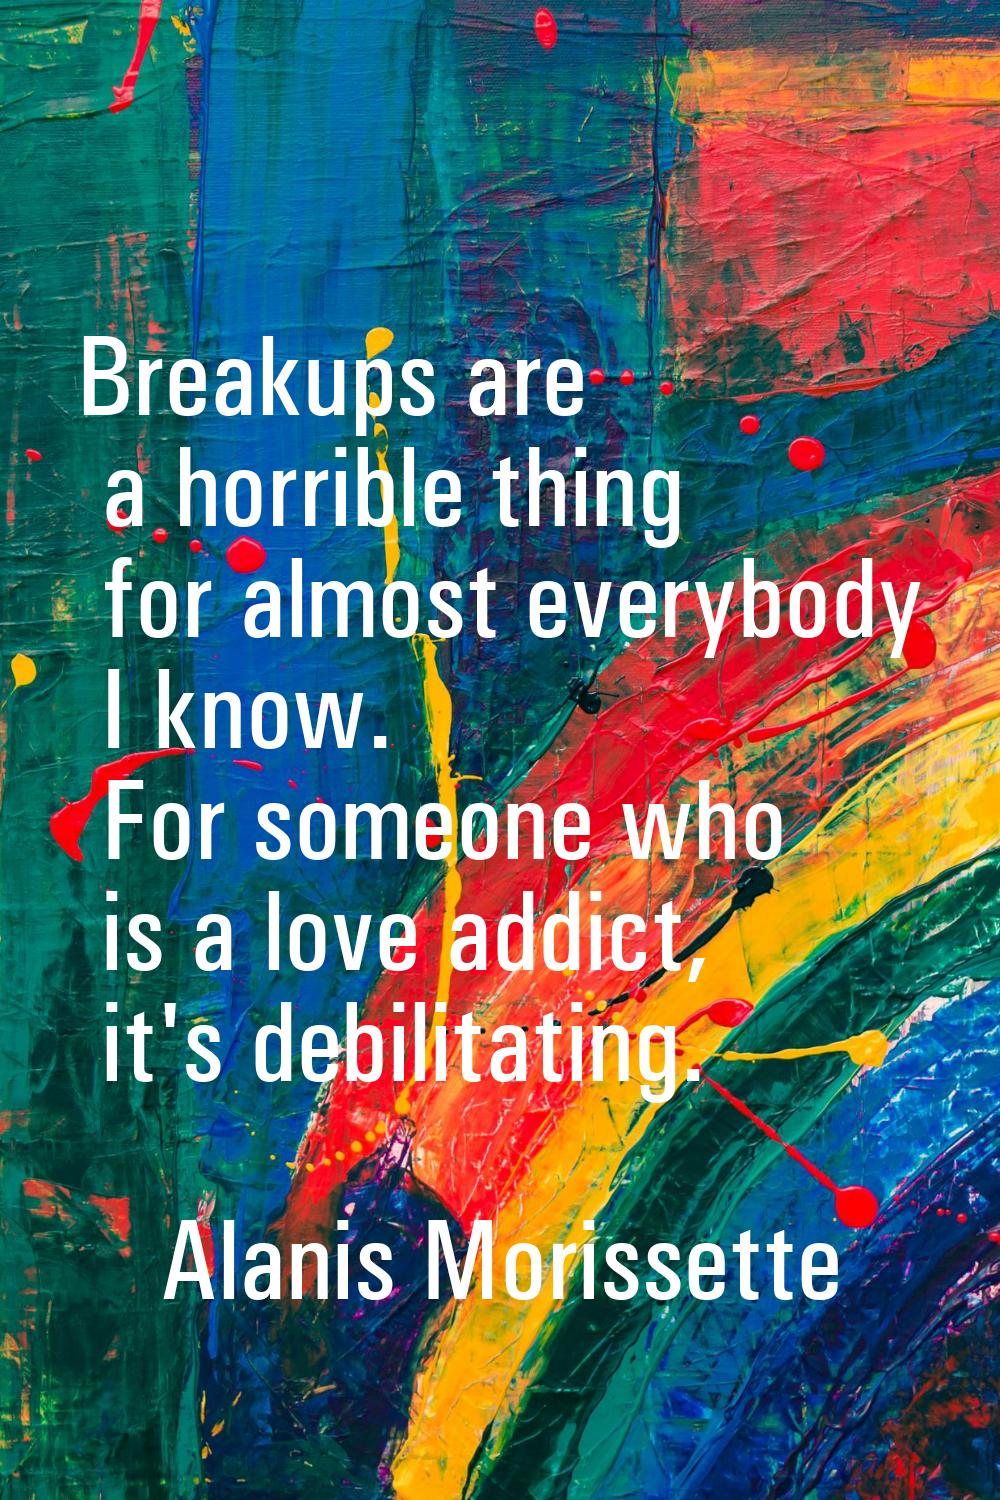 Breakups are a horrible thing for almost everybody I know. For someone who is a love addict, it's d